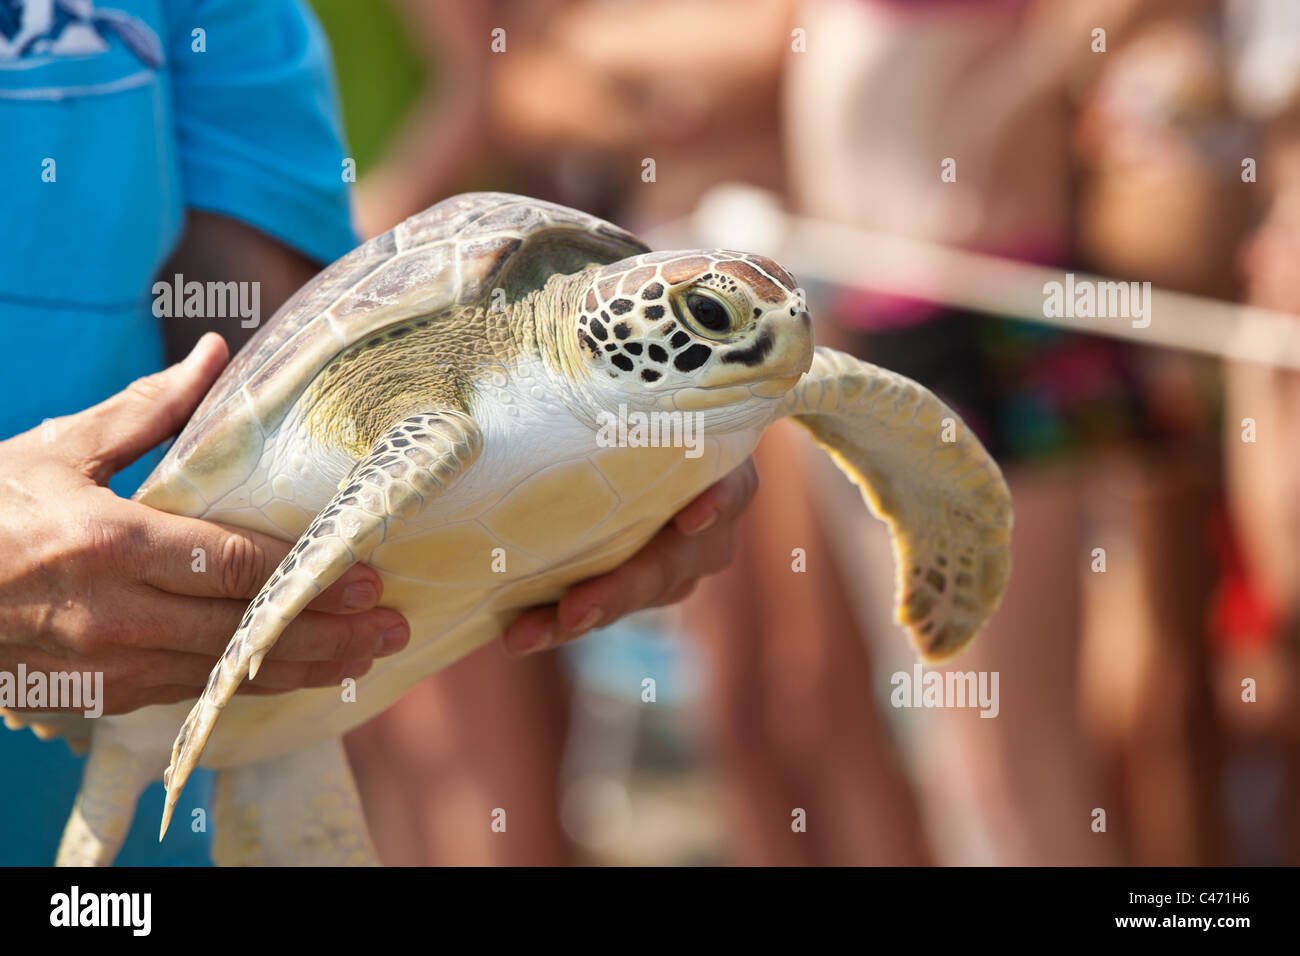 A volunteer from the SC Aquarium carries a rescued juvenile green sea turtle to the ocean for release June 3, 2011 in Kiawah, South Carolina. The sea turtle rescue program rehabilitates sick and injured sea turtles recovered along the coast of South Carolina. Stock Photo